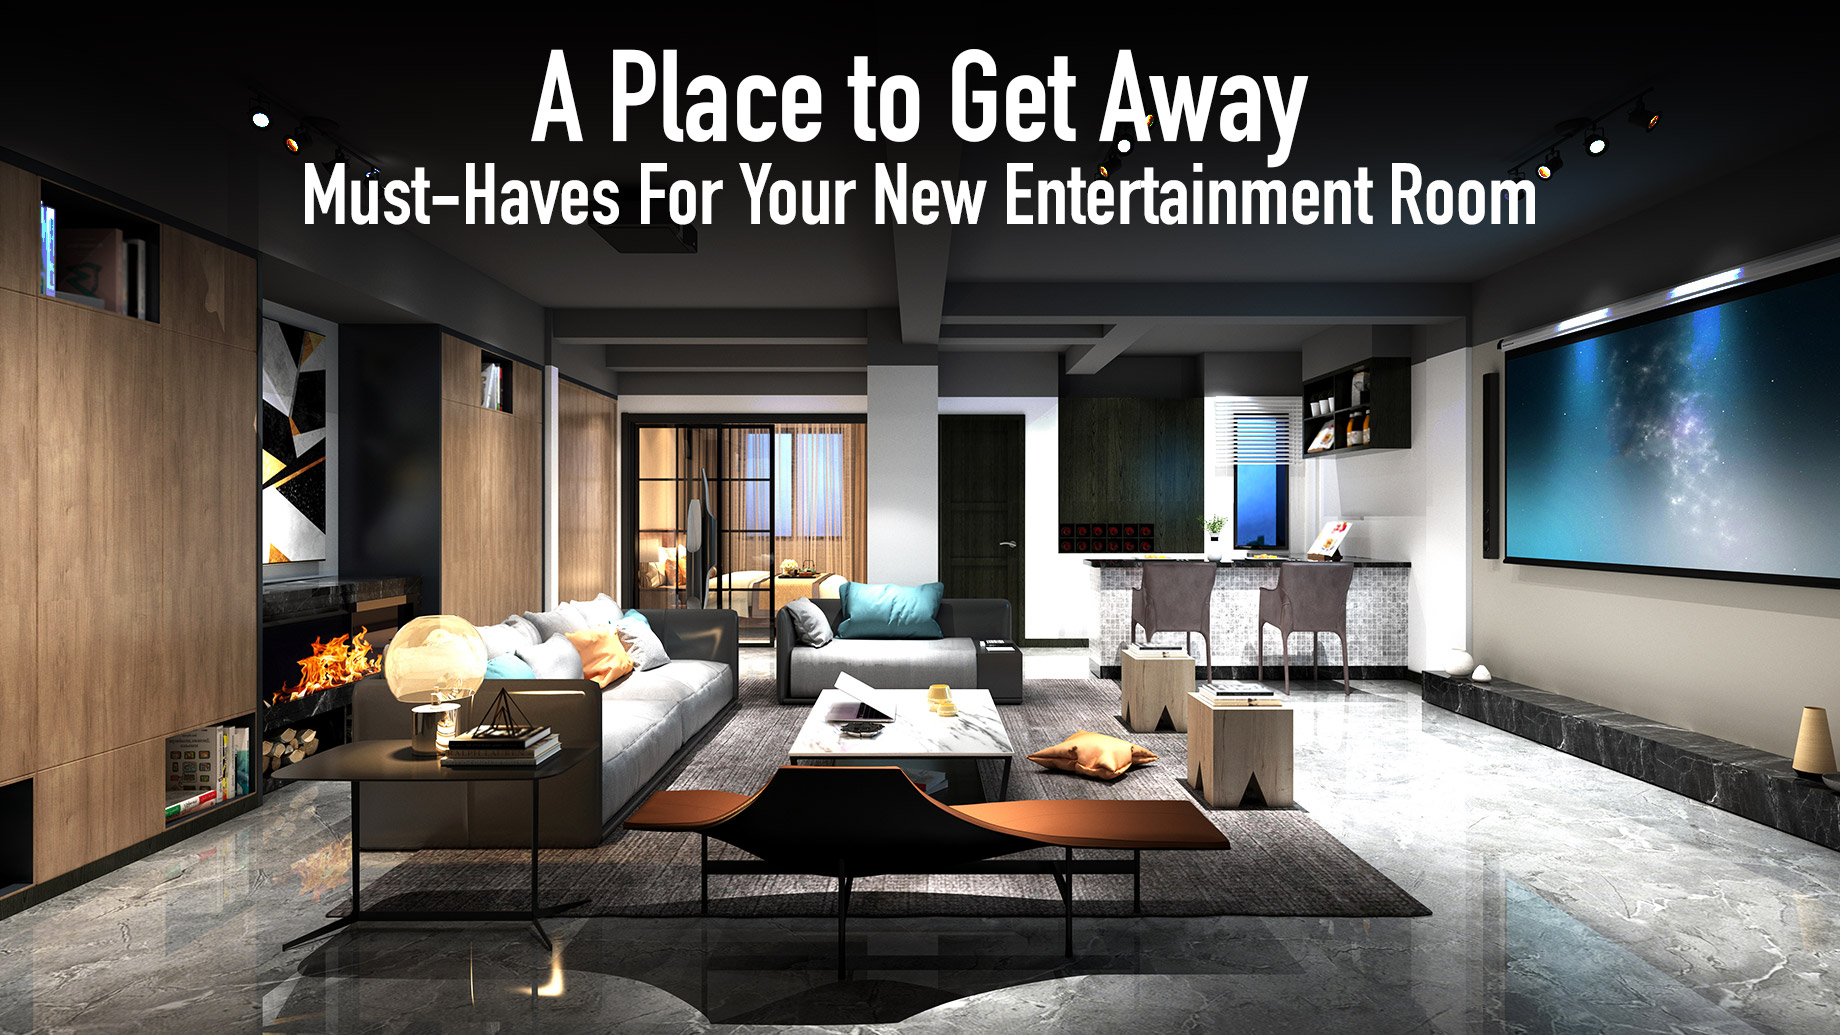 A Place to Get Away - Must-Haves For Your New Entertainment Room